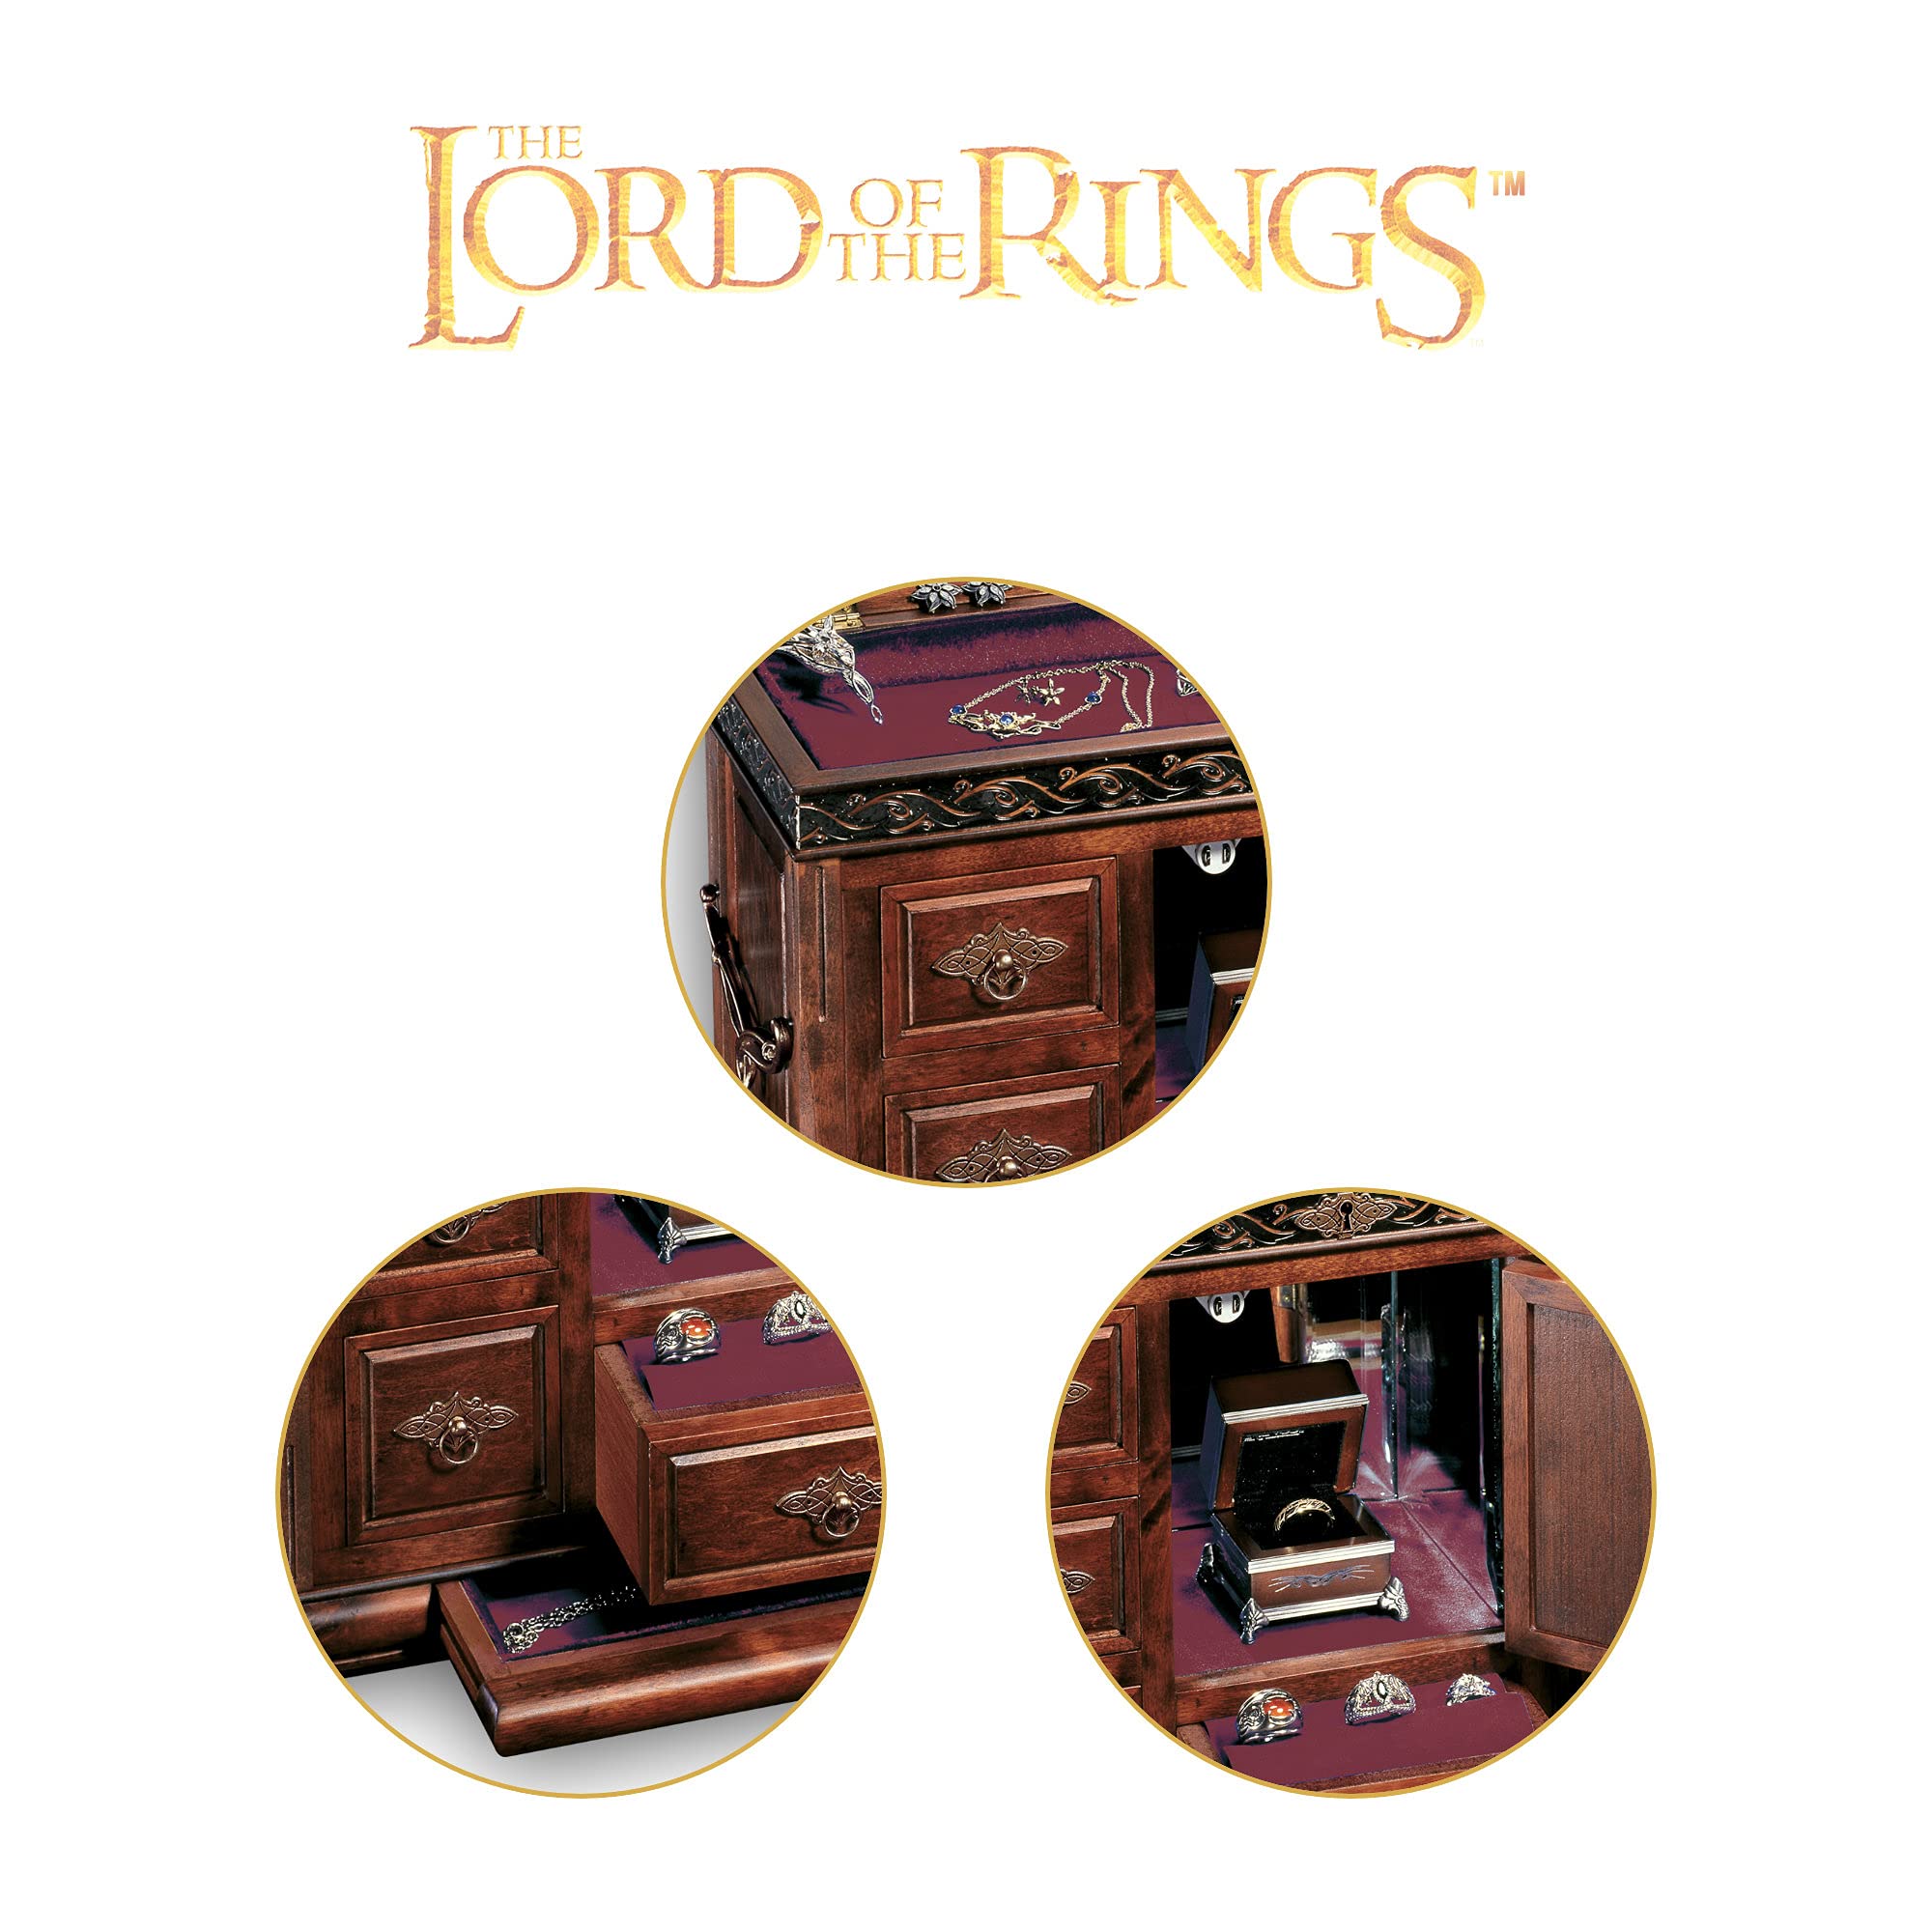 The Noble Collection The Lord of The Rings Middle Earth Treasure Chest – 12.6 inches (32 cm) Hardwood and Metal Jewellery Box – Officially Licensed Film Set Movie Props Gifts